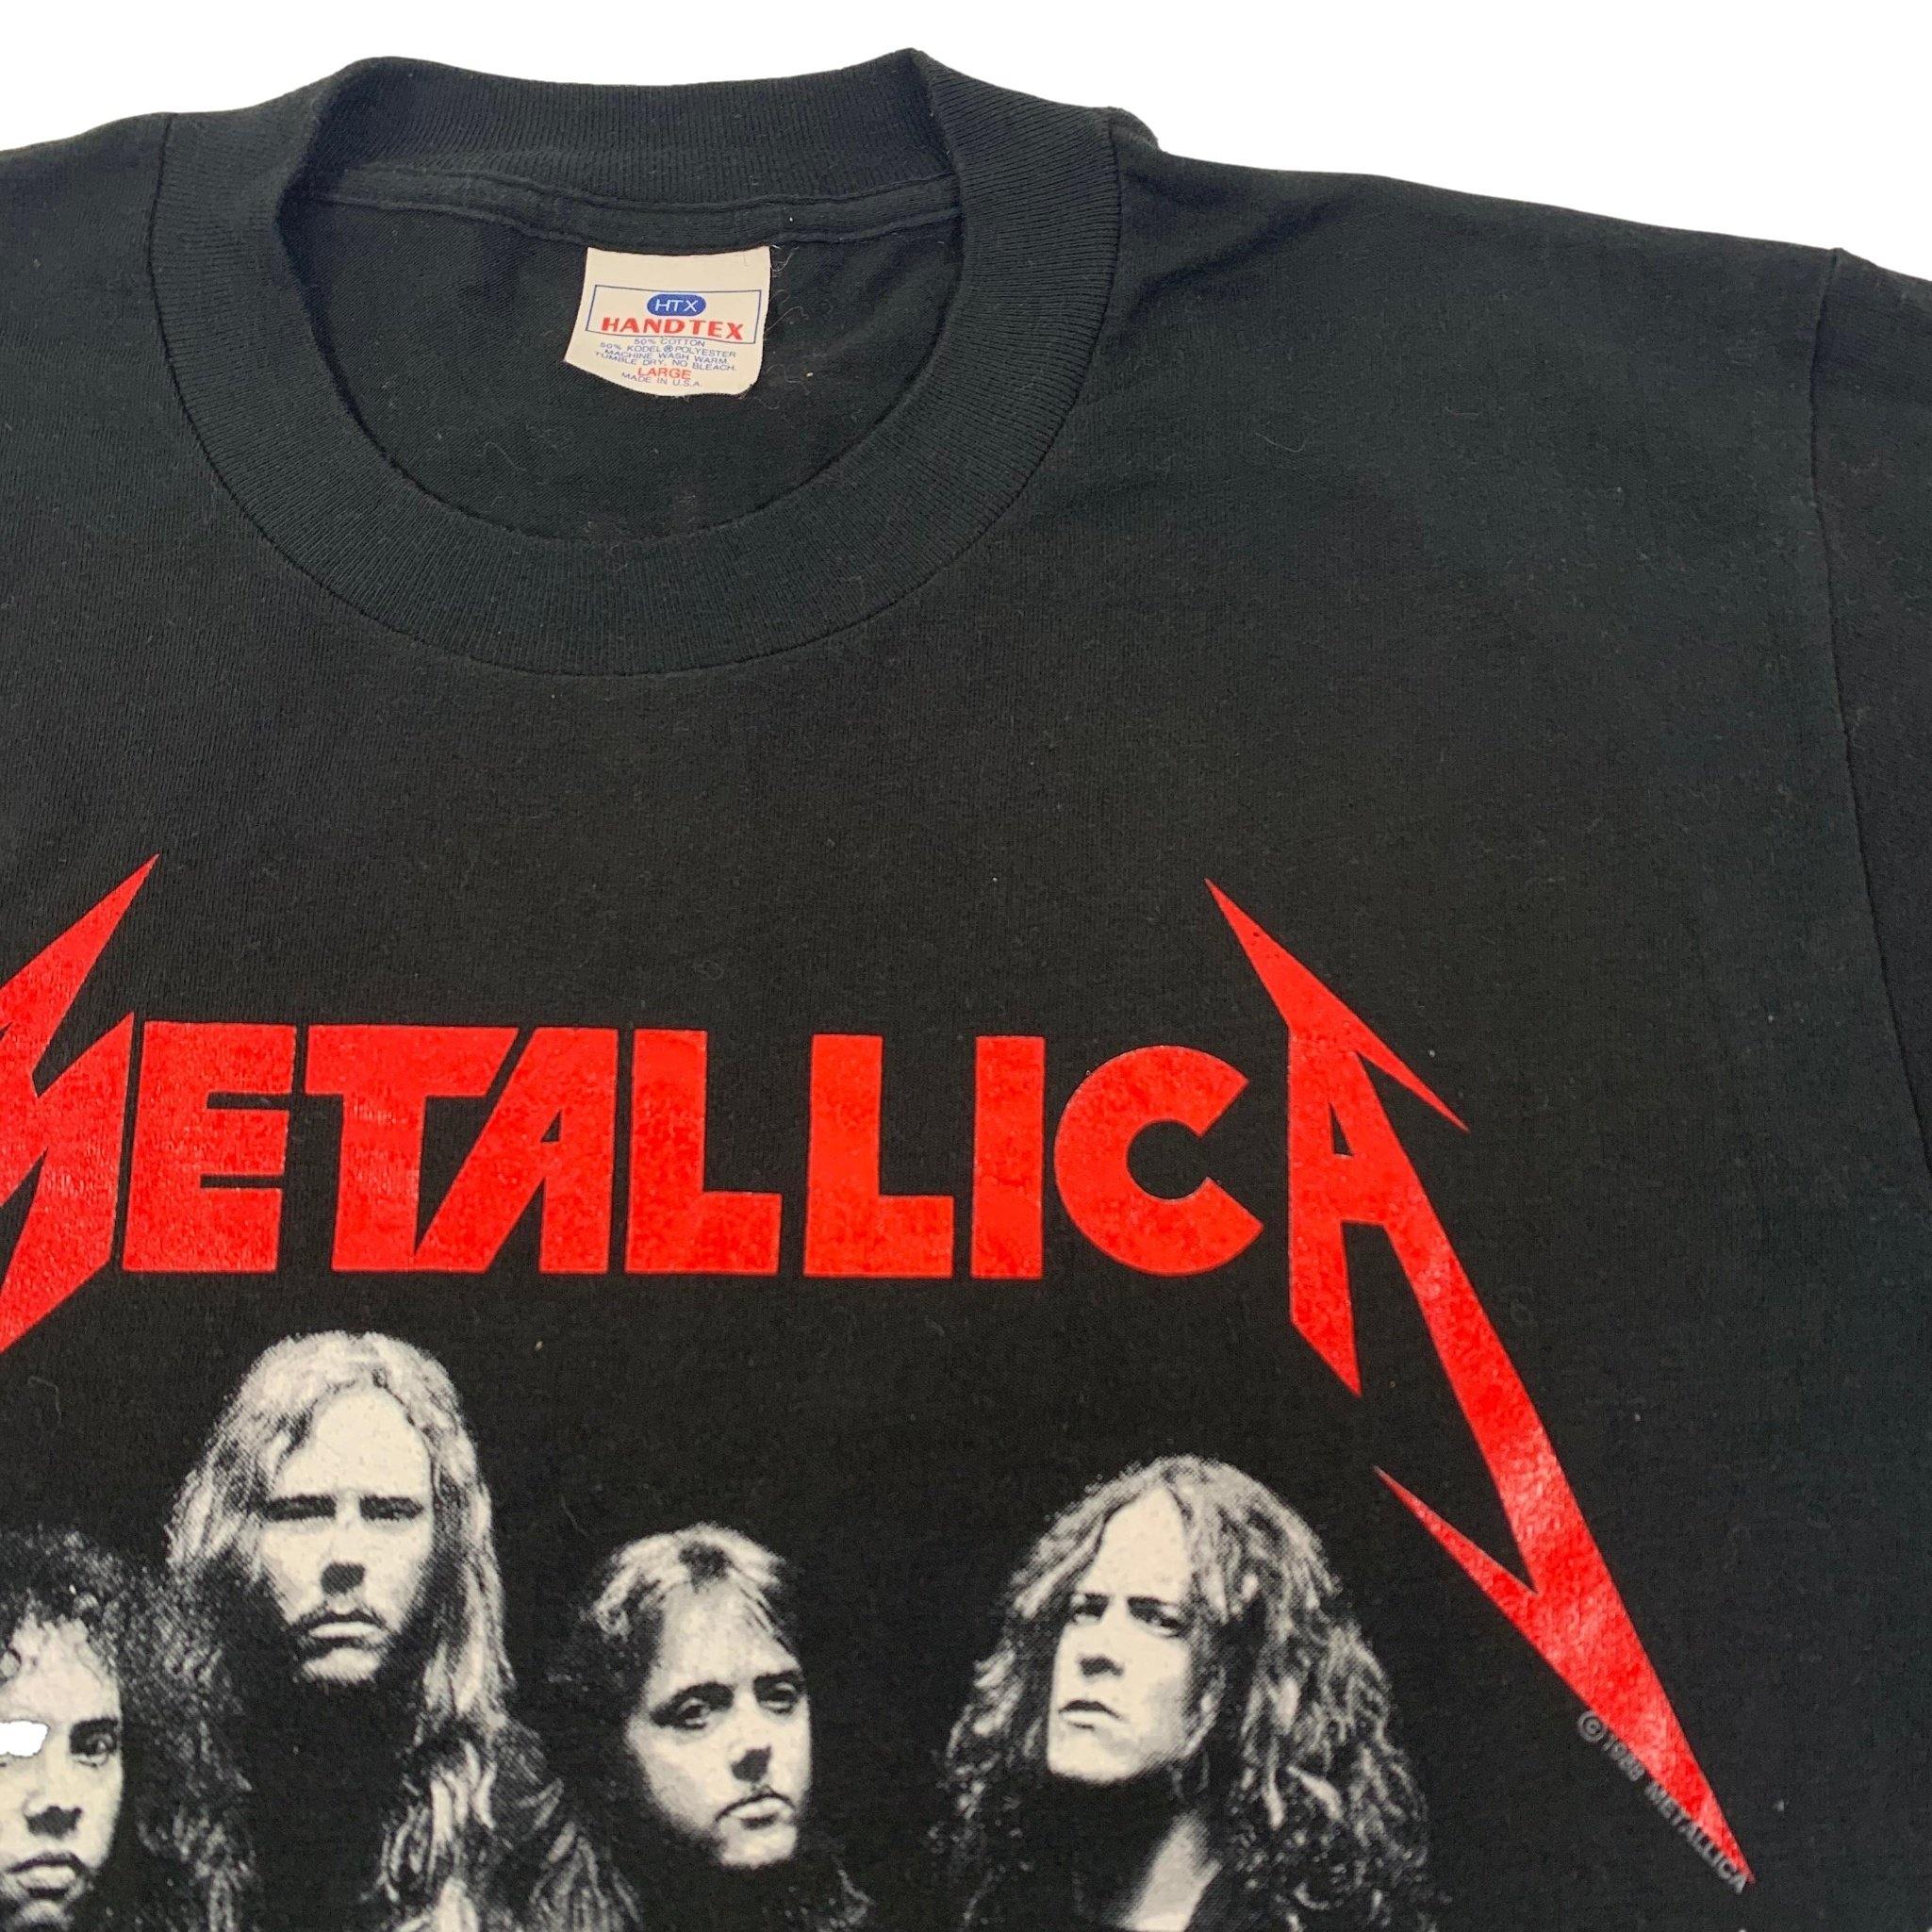 Vintage Metallica And Justice For All T Shirt 1988 for Sale in San